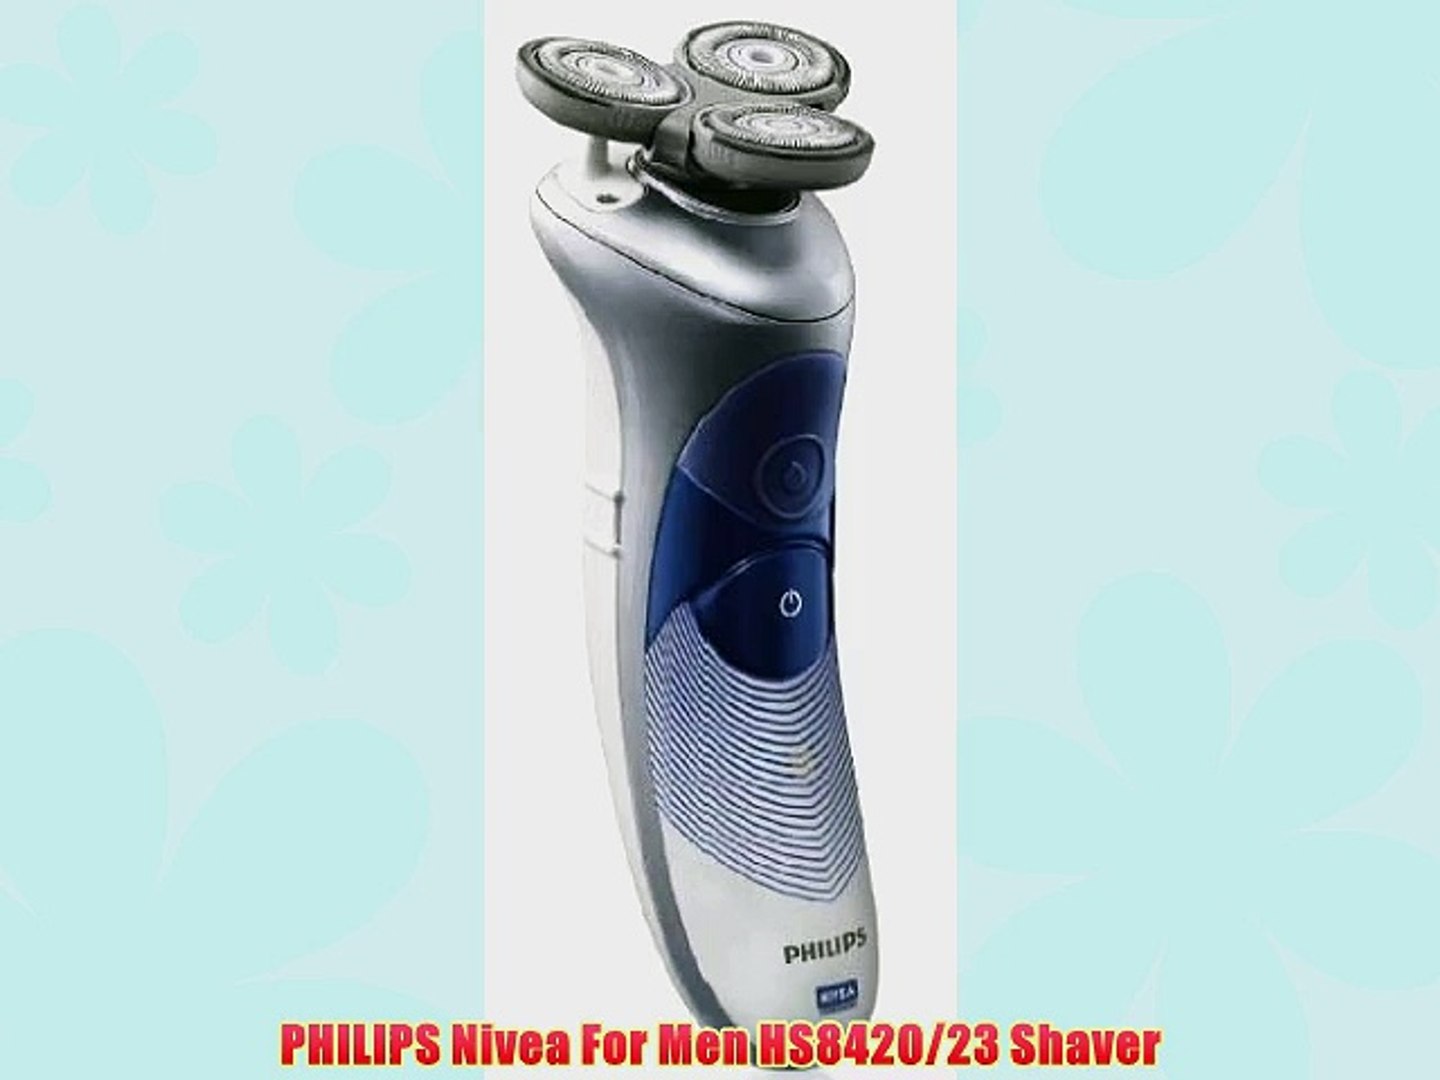 PHILIPS Nivea For Men HS8420/23 Shaver - video Dailymotion